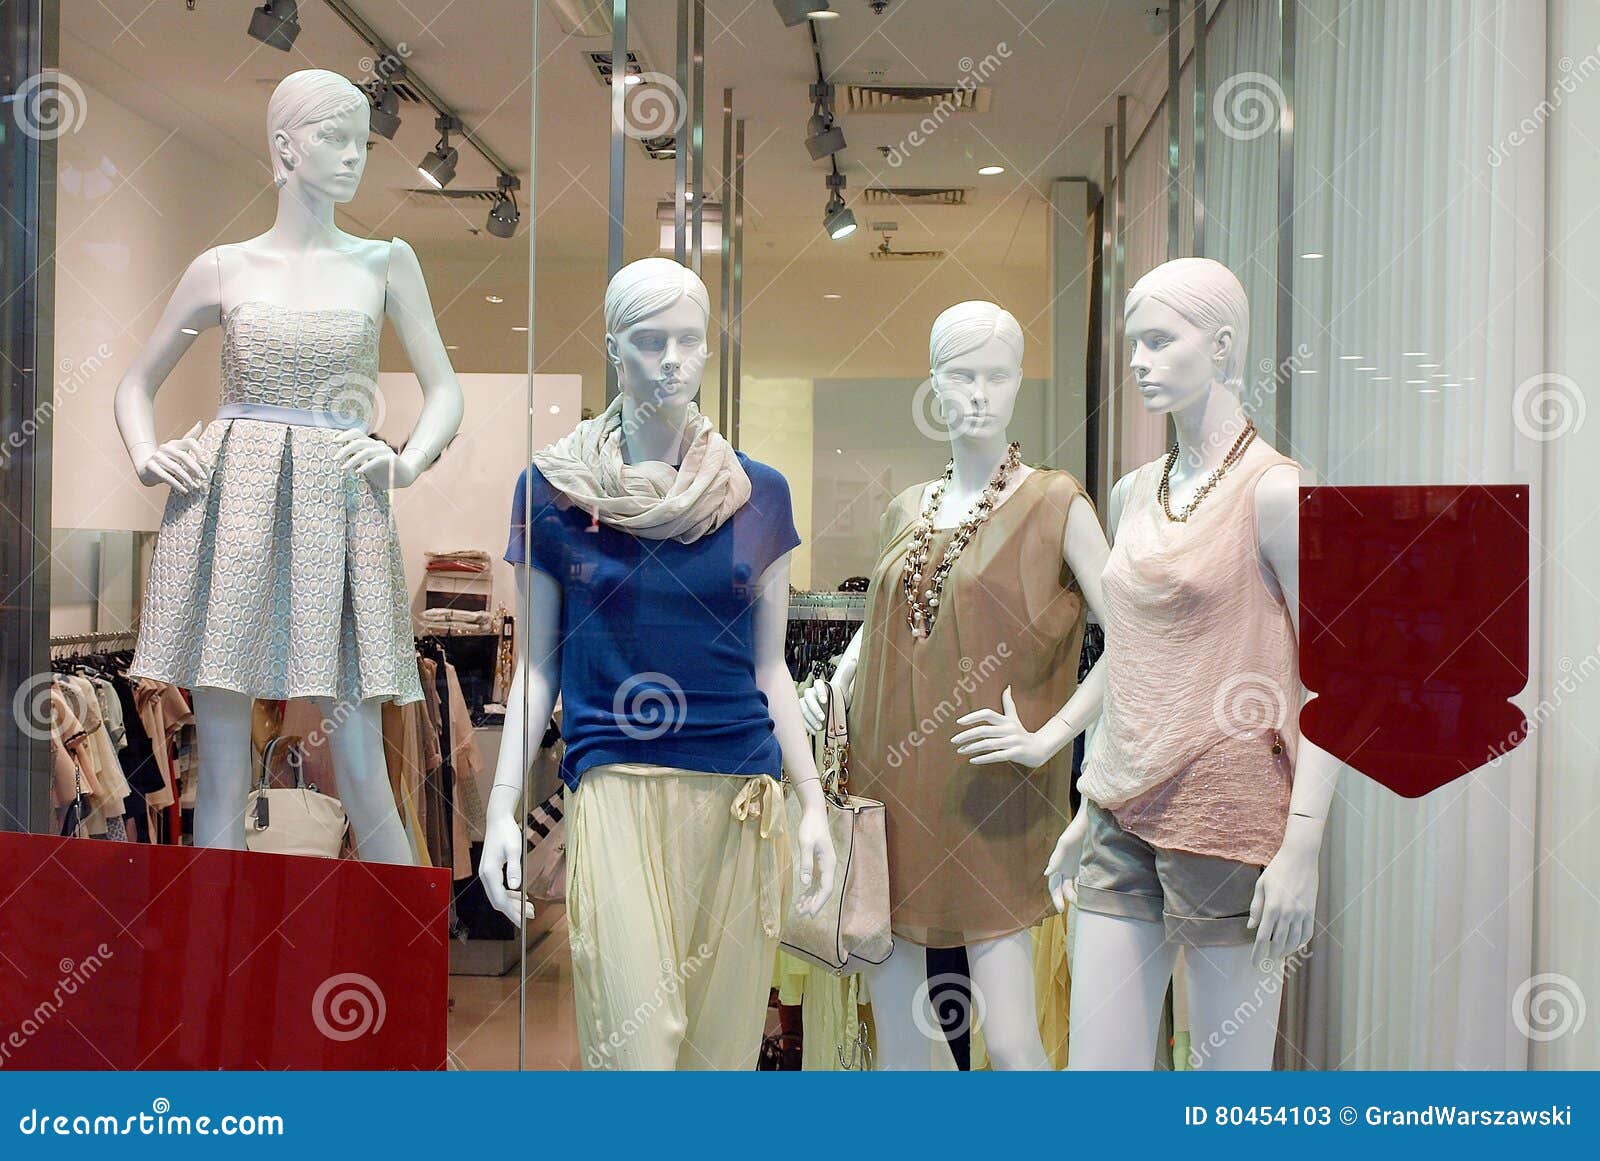 Girl Mannequins in Shop Window Stock Image - Image of fashionable ...